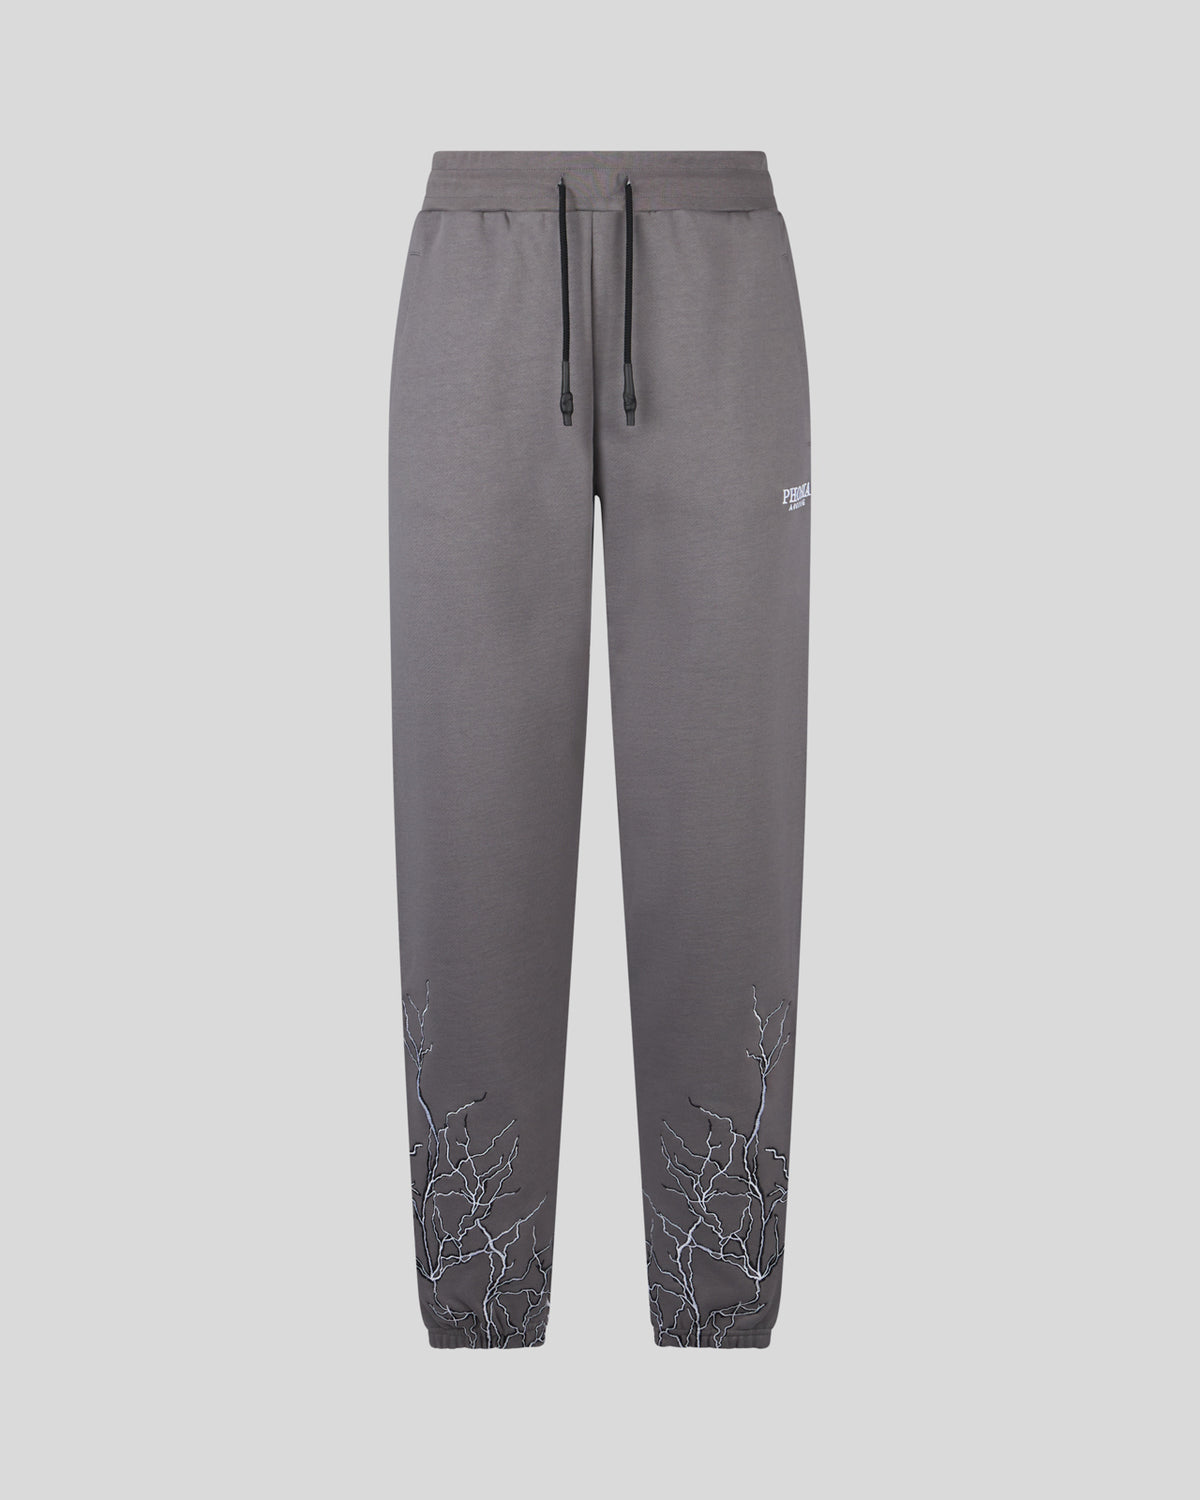 PHOBIA GREY PANT WITH GREY EMBROIDERY LIGHTNING